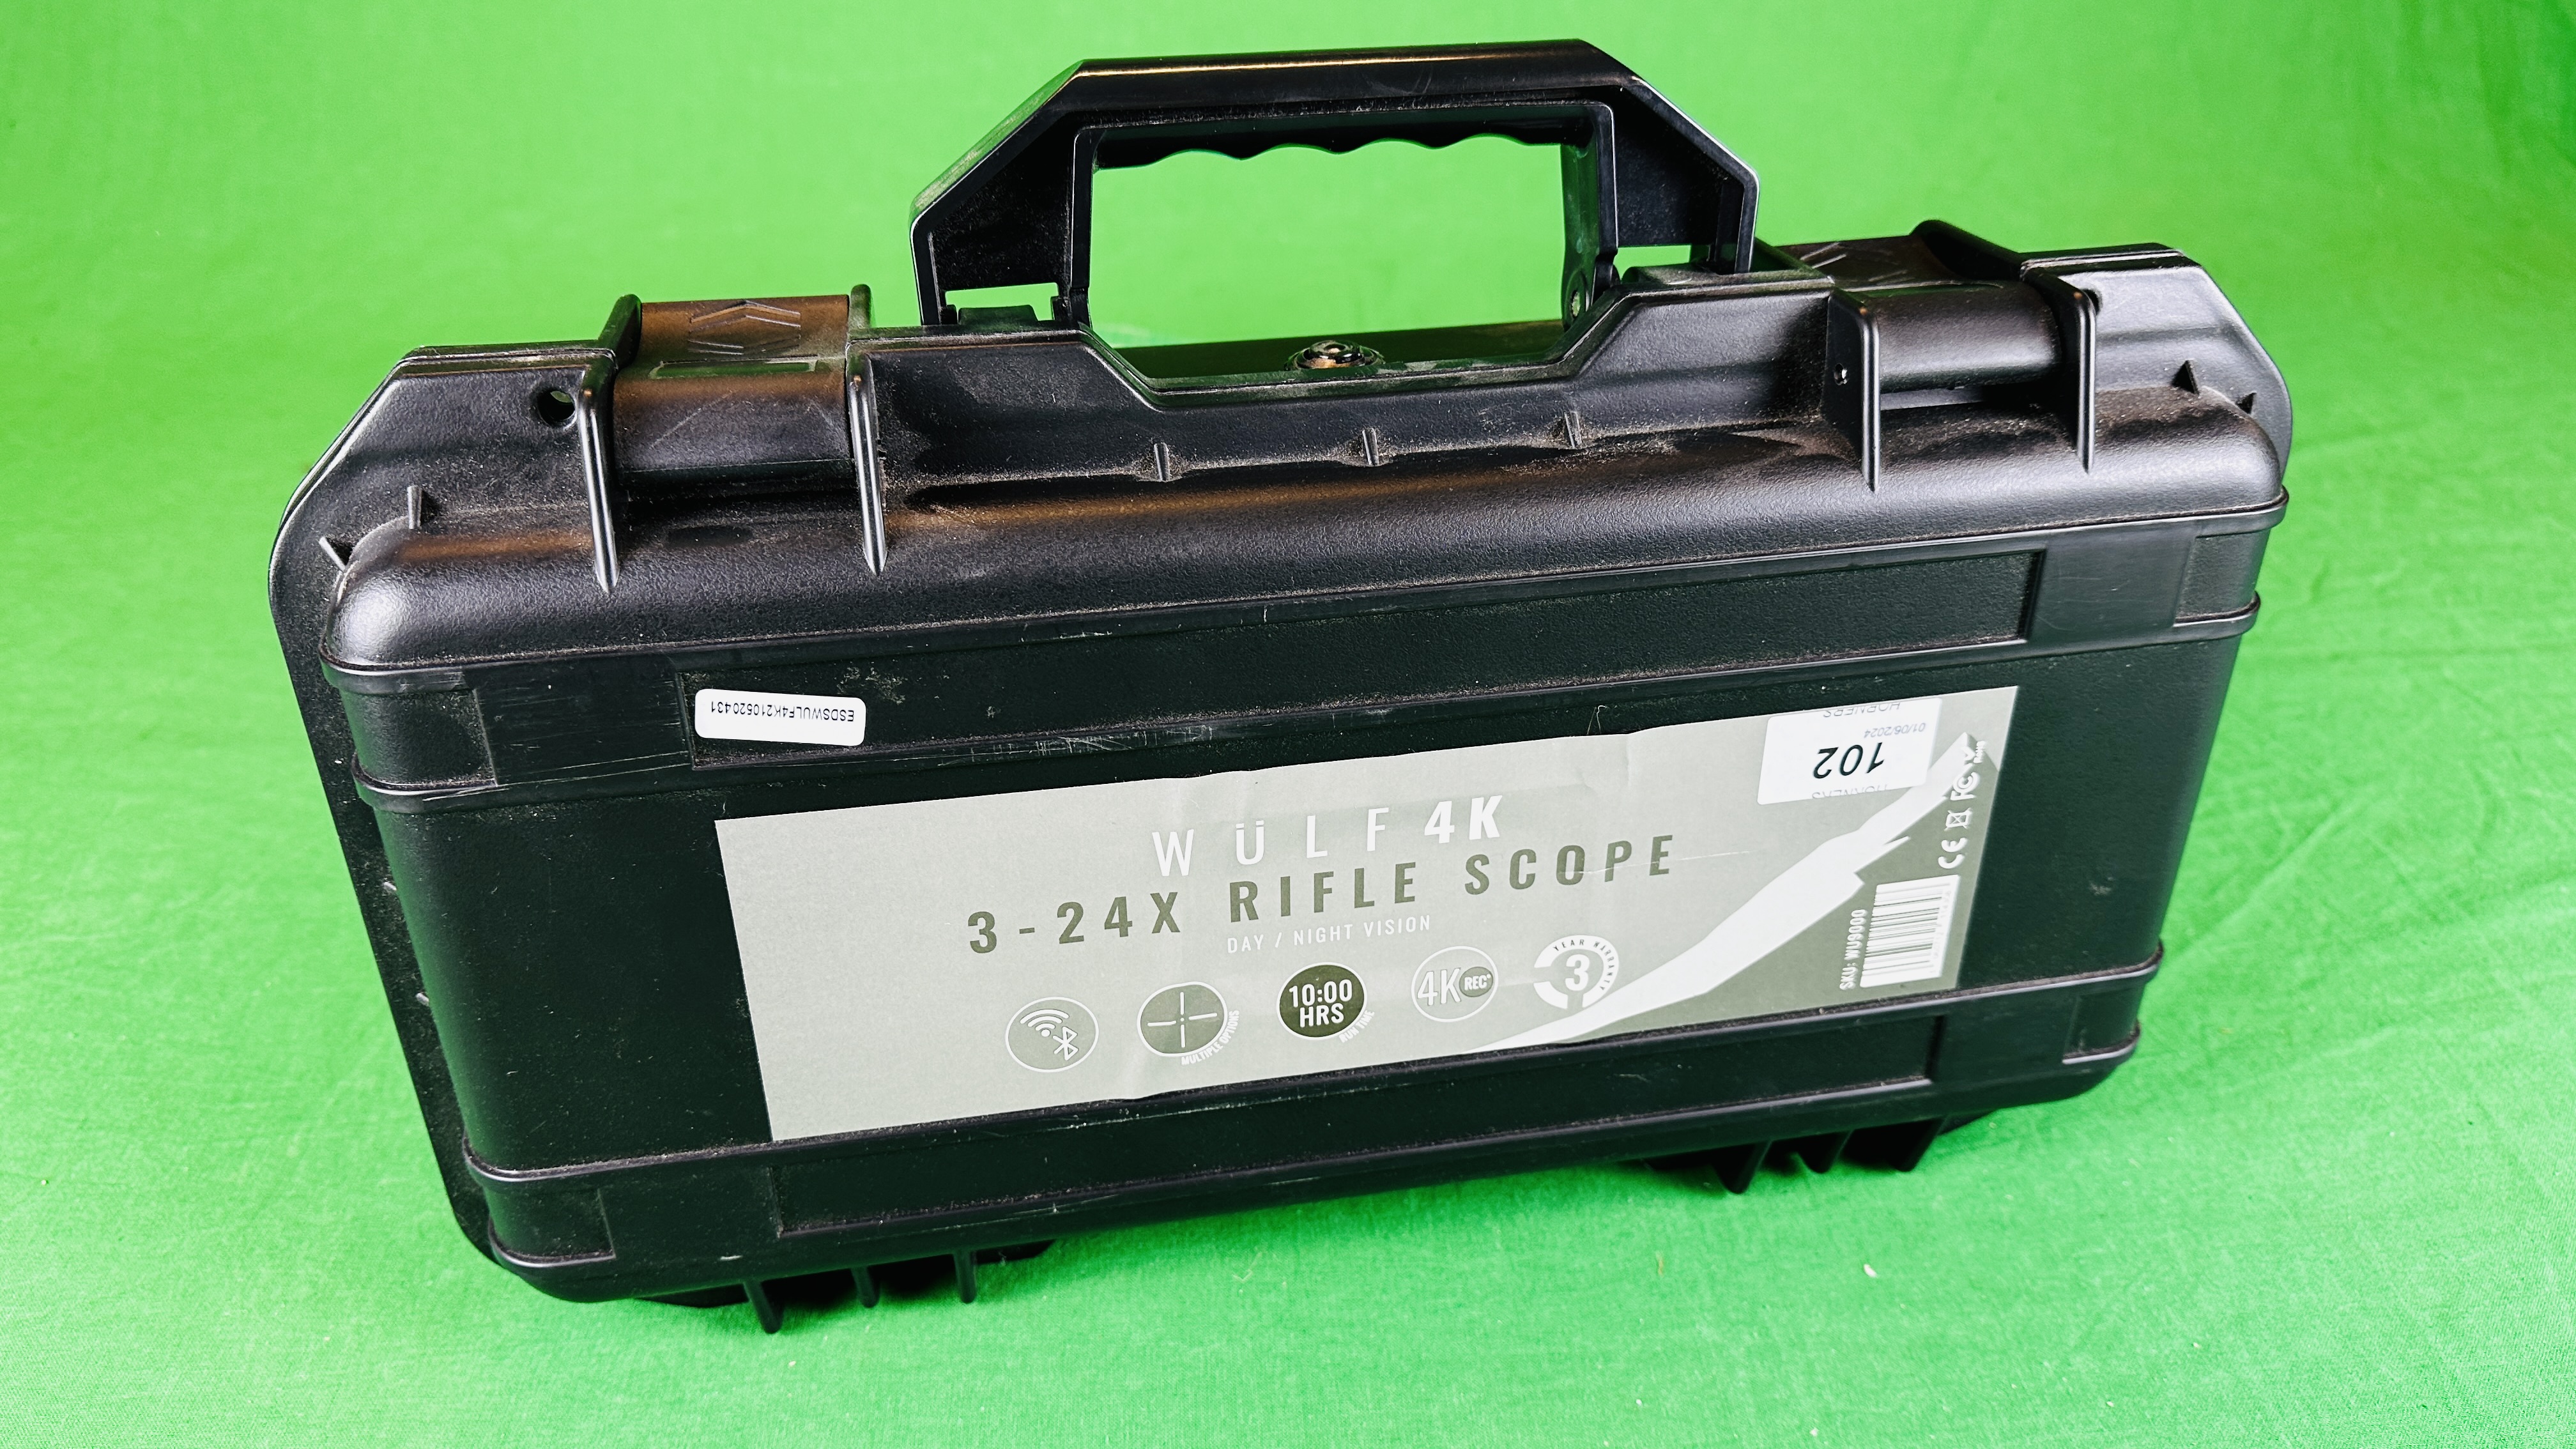 WULF 3-24X DAY/NIGHT VISION RIFLE SCOPE IN HARD SHELL CARRY CASE WITH ACCESSORIES. - Bild 24 aus 24